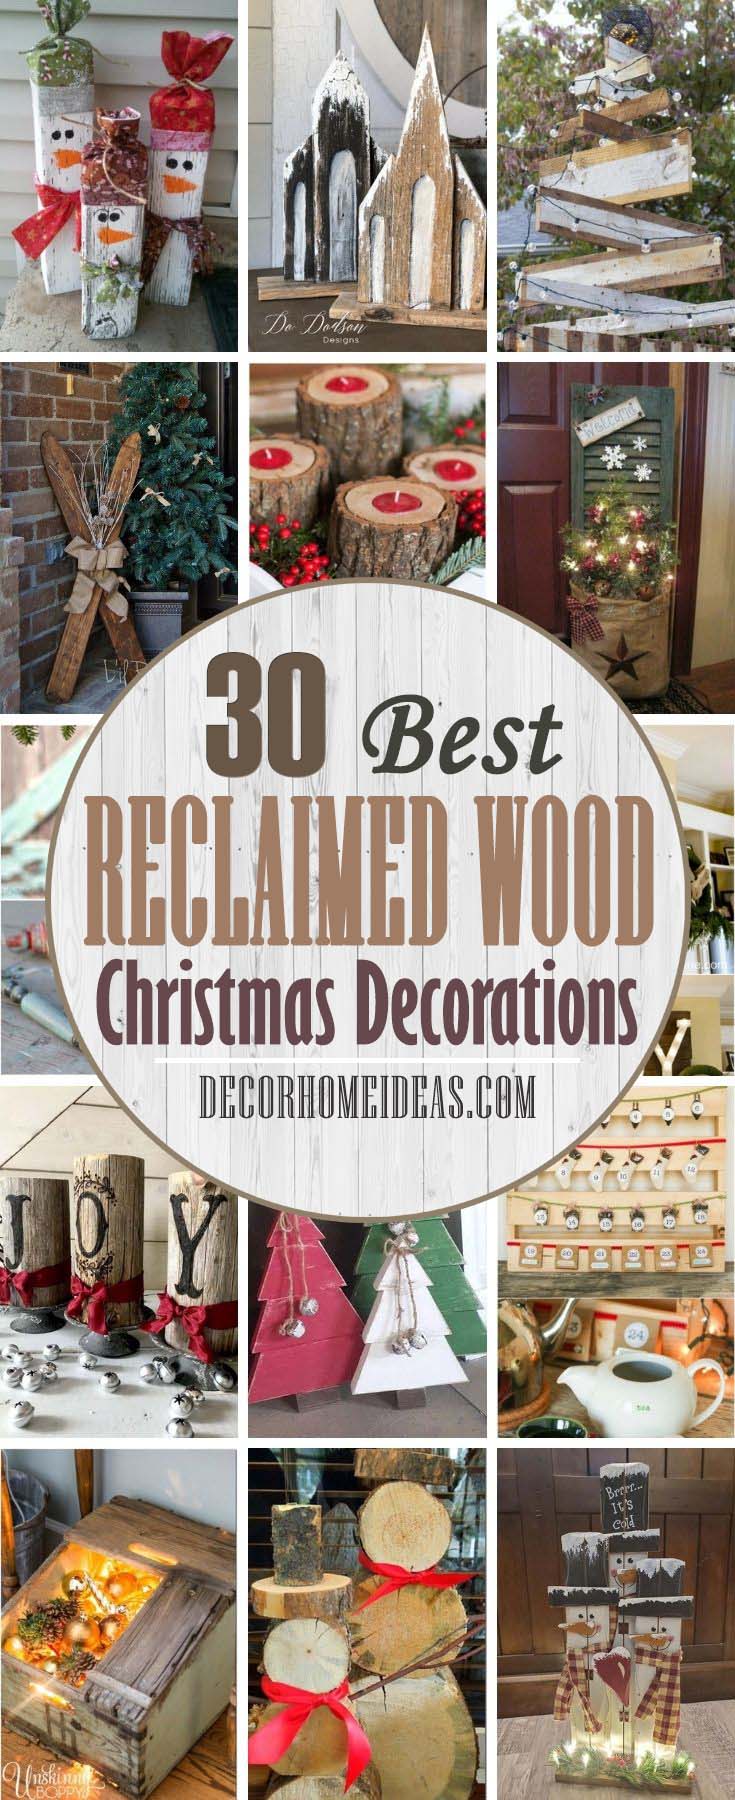 Best Reclaimed Wood Christmas Decorations